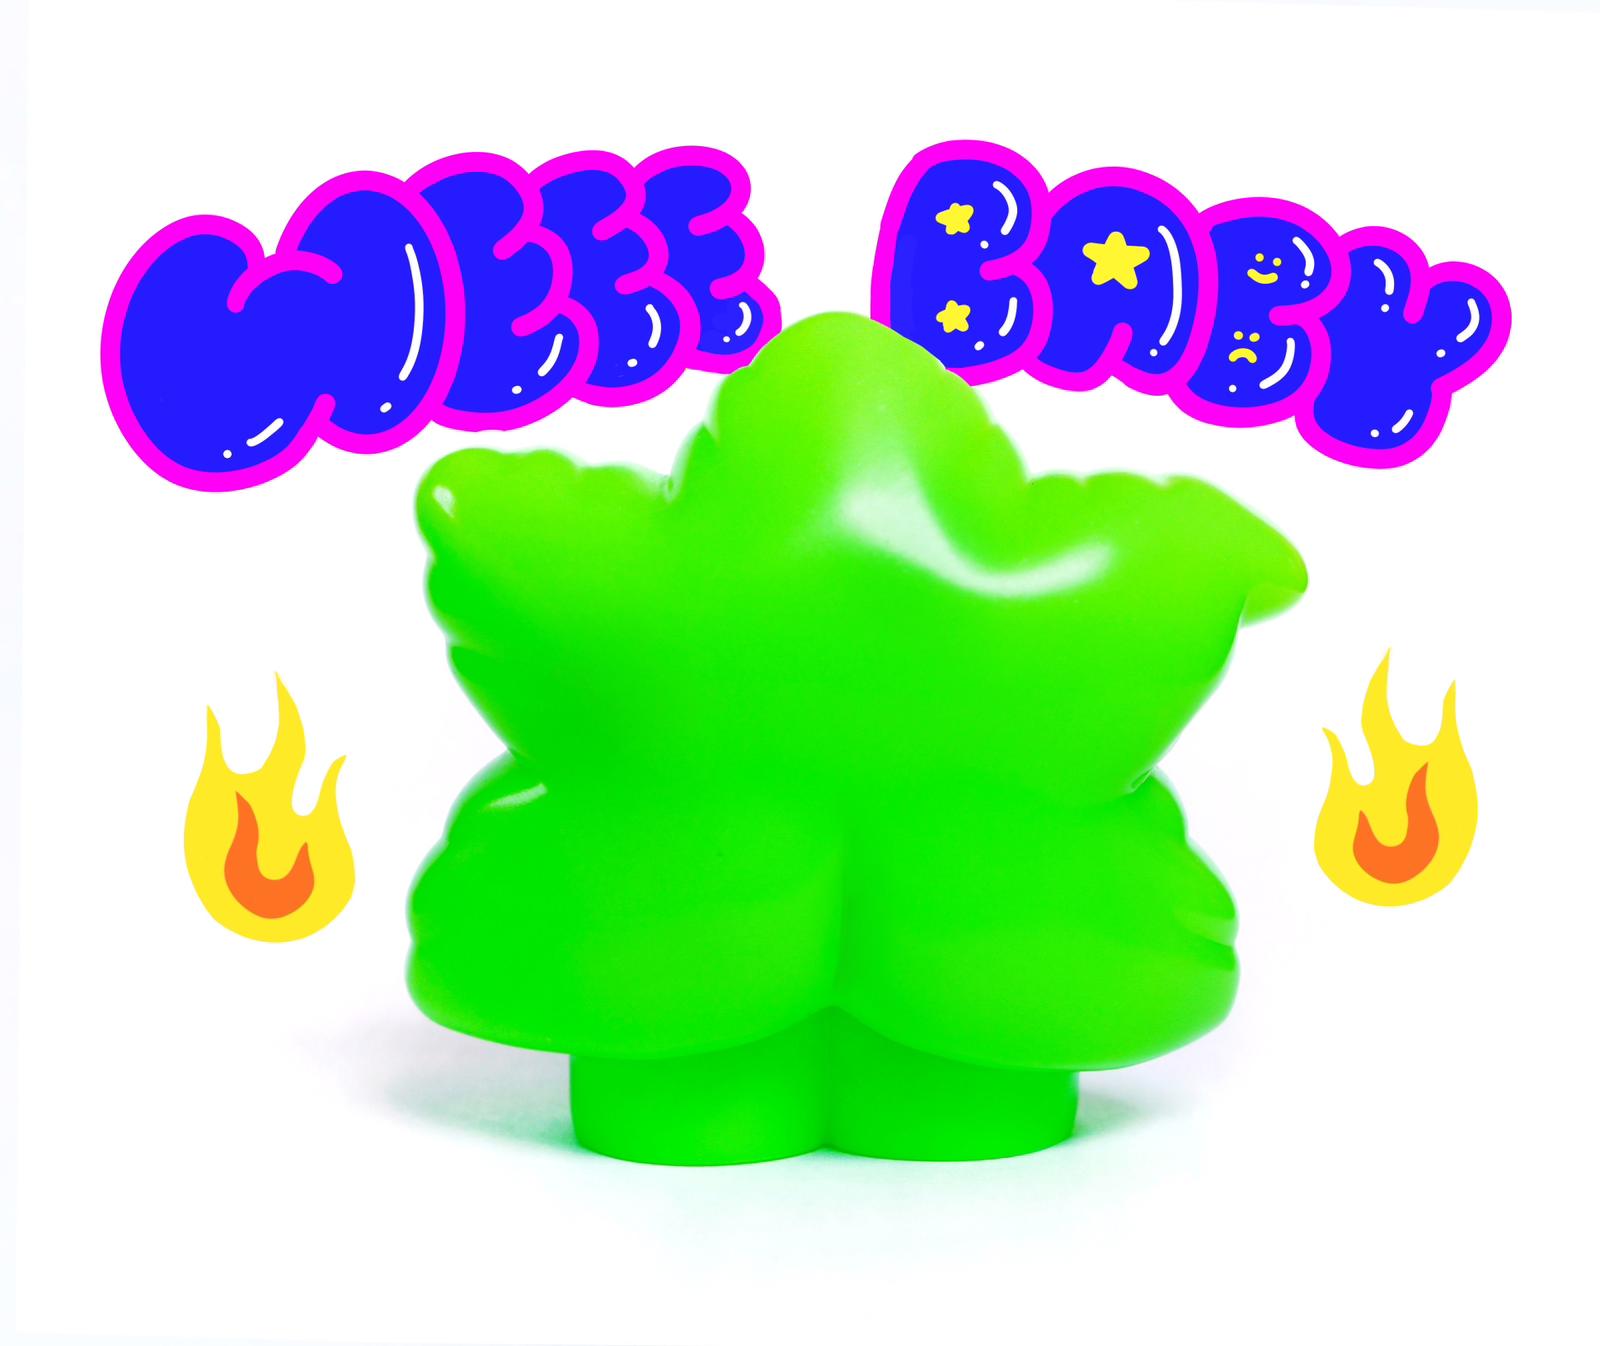 Weee baby - Preorder: Green toy with text, close-up balloon.